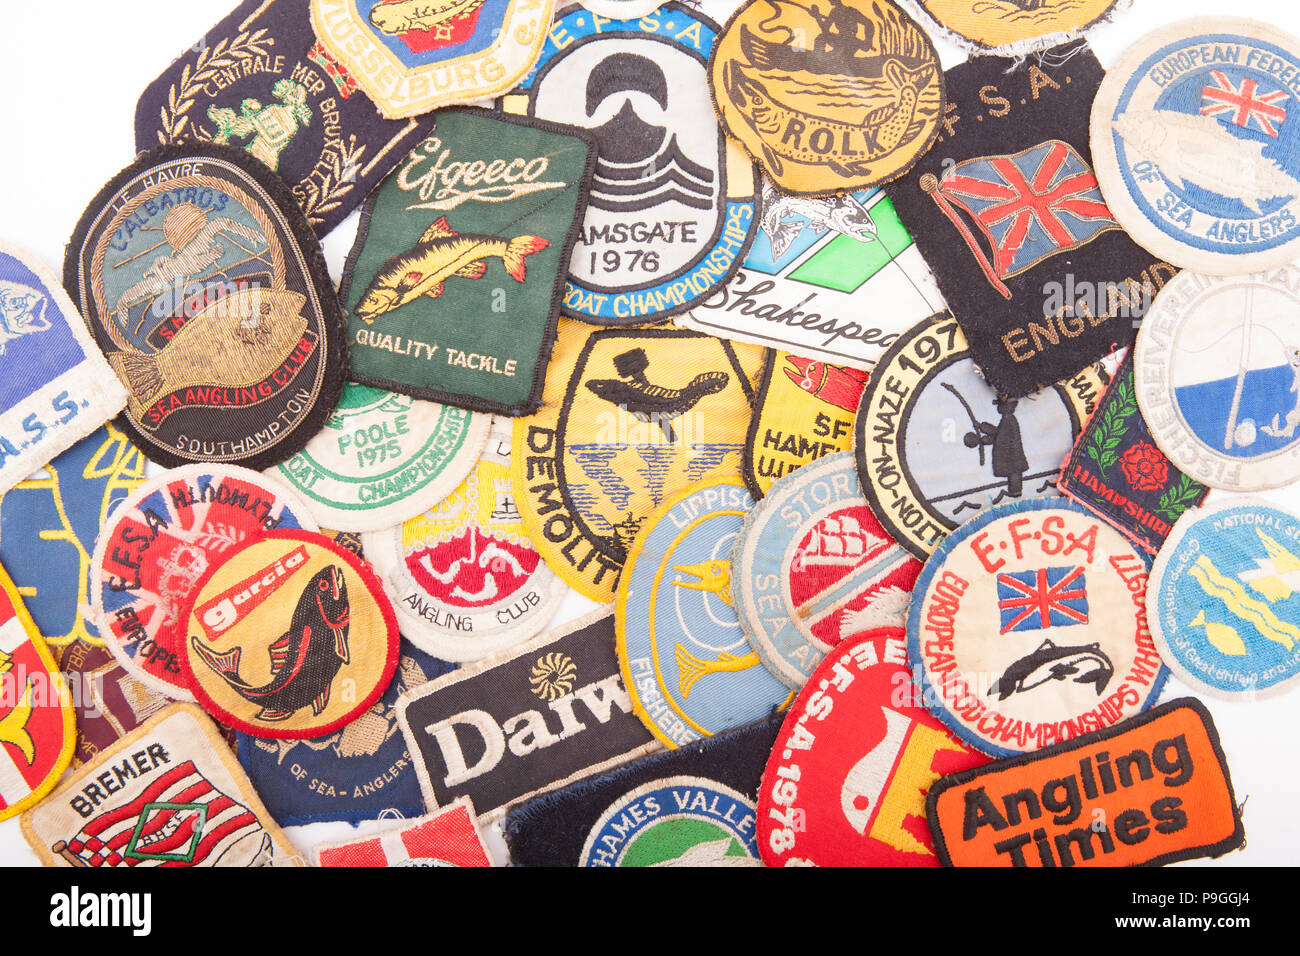 https://c8.alamy.com/comp/P9GGJ4/a-collection-of-fishing-badges-or-patches-designed-to-be-sewn-onto-clothing-from-a-vintage-fishing-tackle-collection-dorset-england-uk-gb-P9GGJ4.jpg